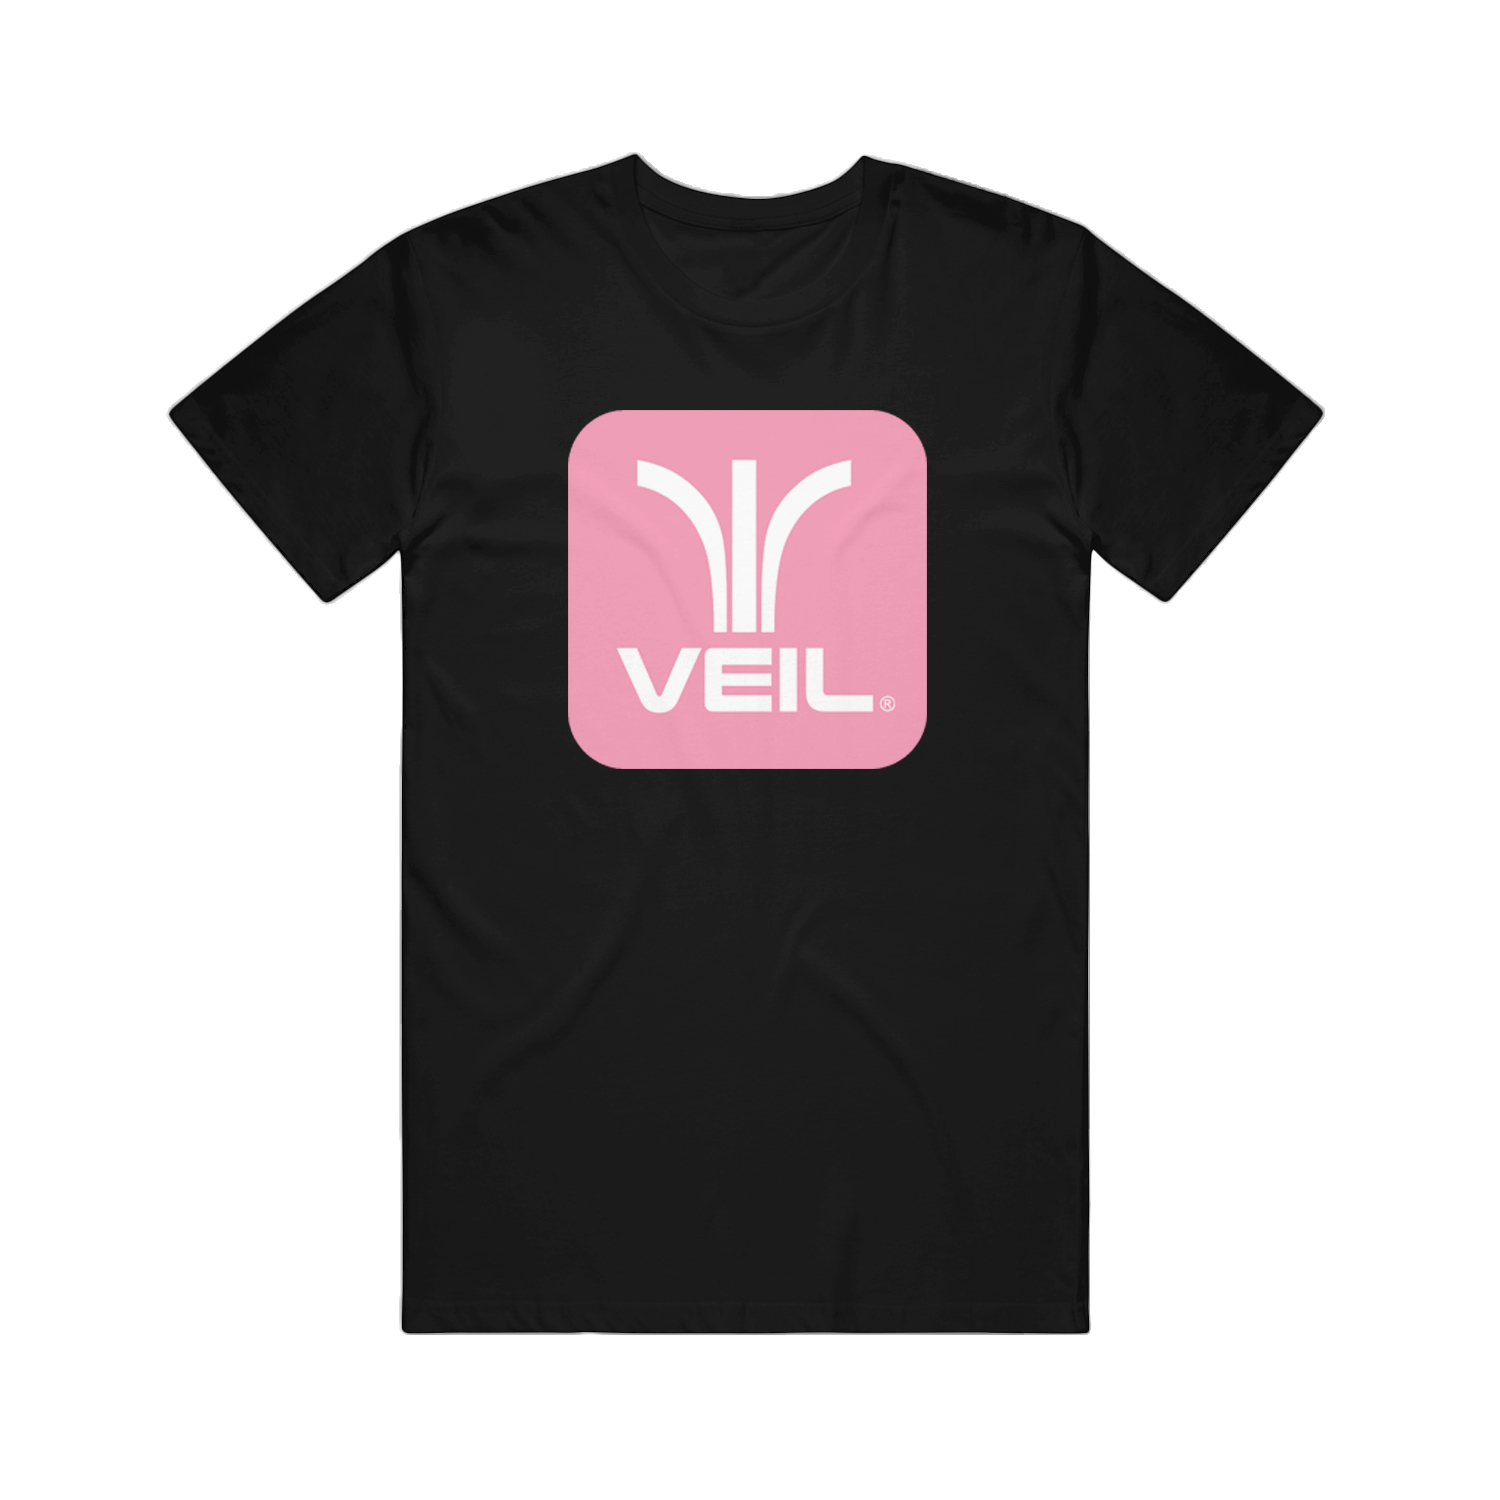 image of a black tee shirt on a transparent background. front of tee has a print in the style of the atari game system logo that says veil 